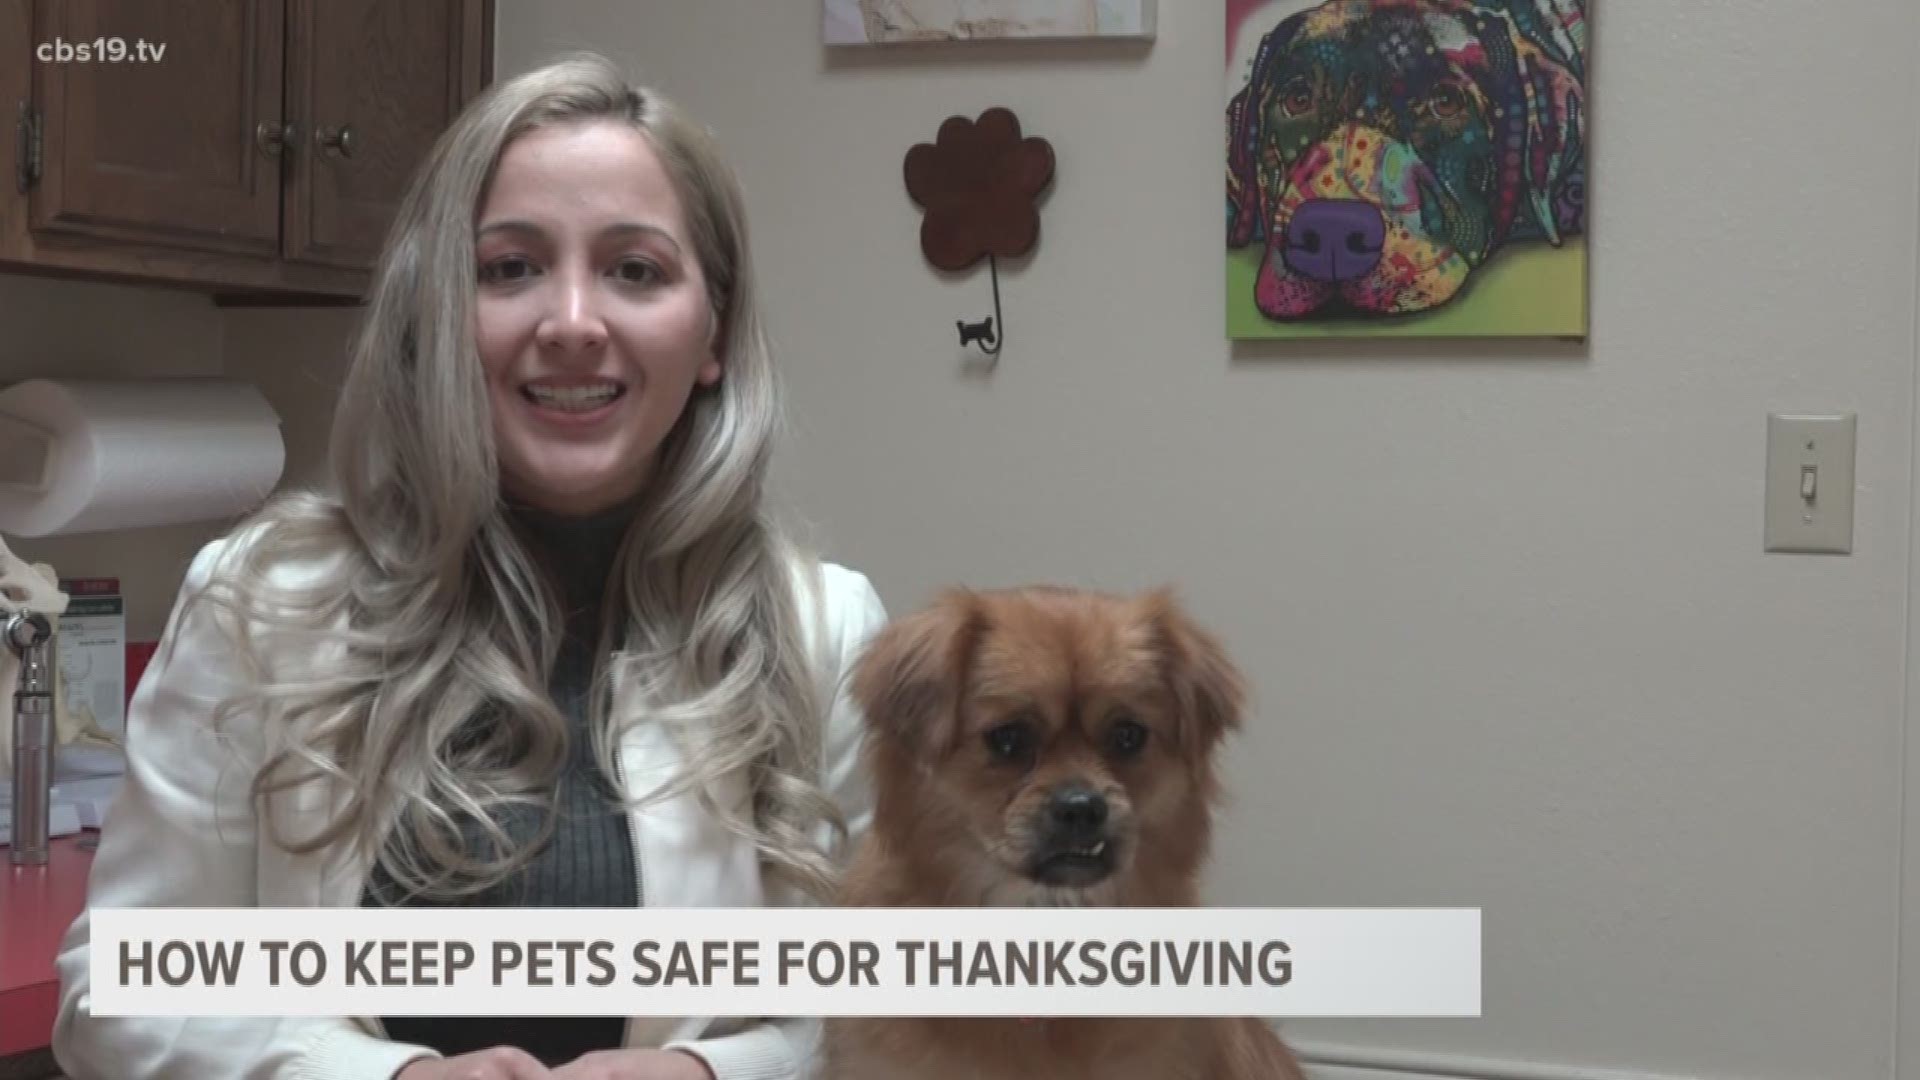 If you're having Thanksgiving at your aunt's, grandma's, wherever, often times a pet is lurking around the Thanksgiving table waiting for you to drop a piece of turkey or ham. Turkey is fine but not everything on your plate is okay for cats and dogs.